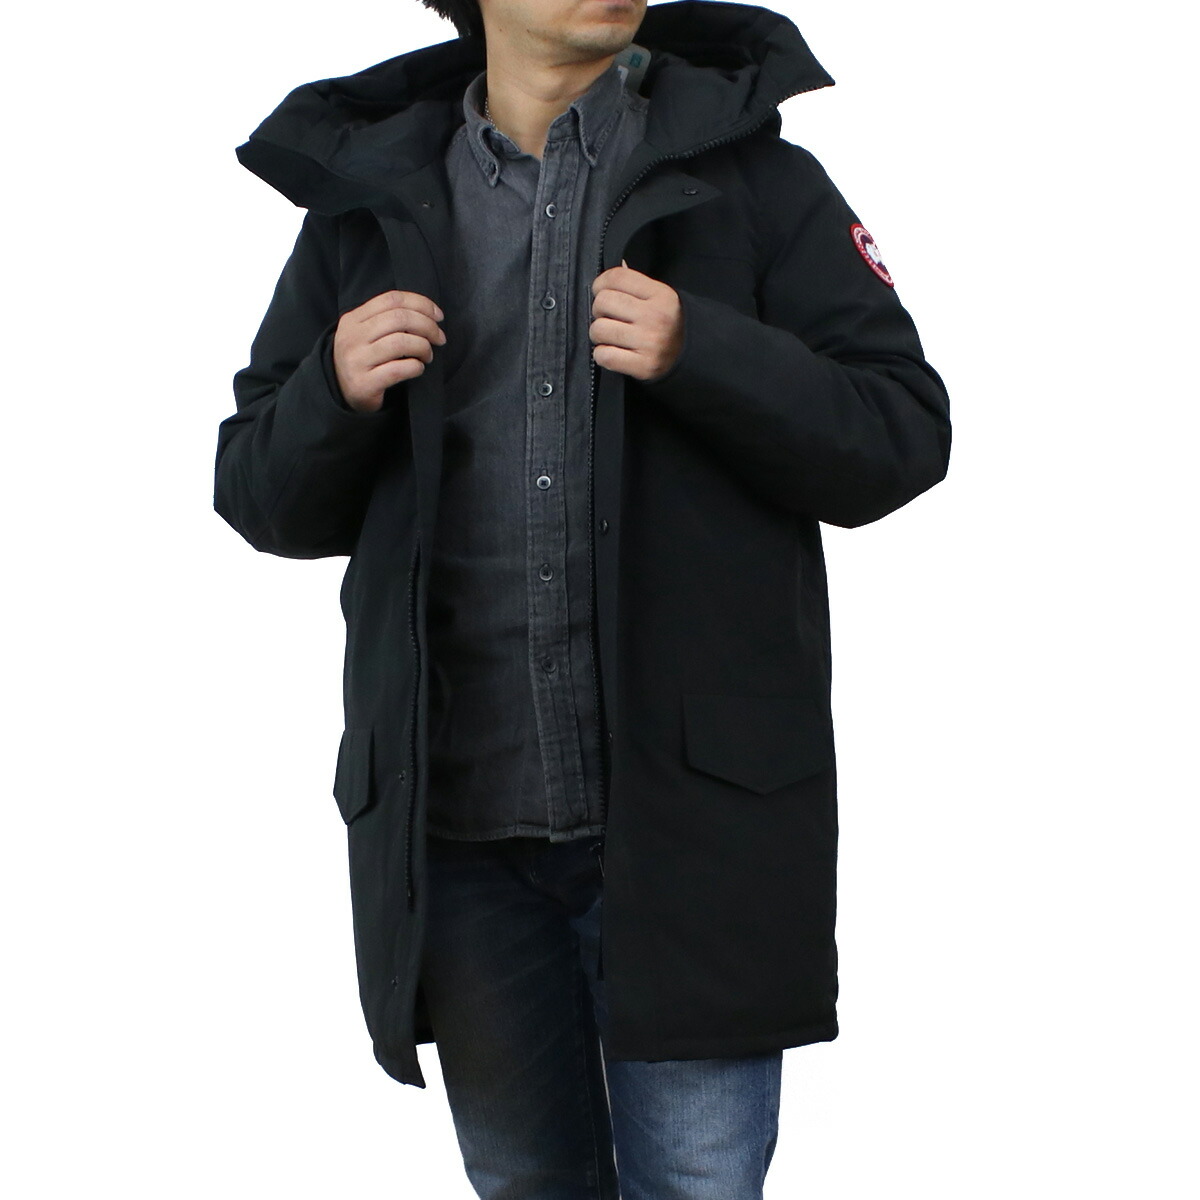 Armerie Boutique / カナダグース CANADA GOOSE LANGFORD PARKA メンズ